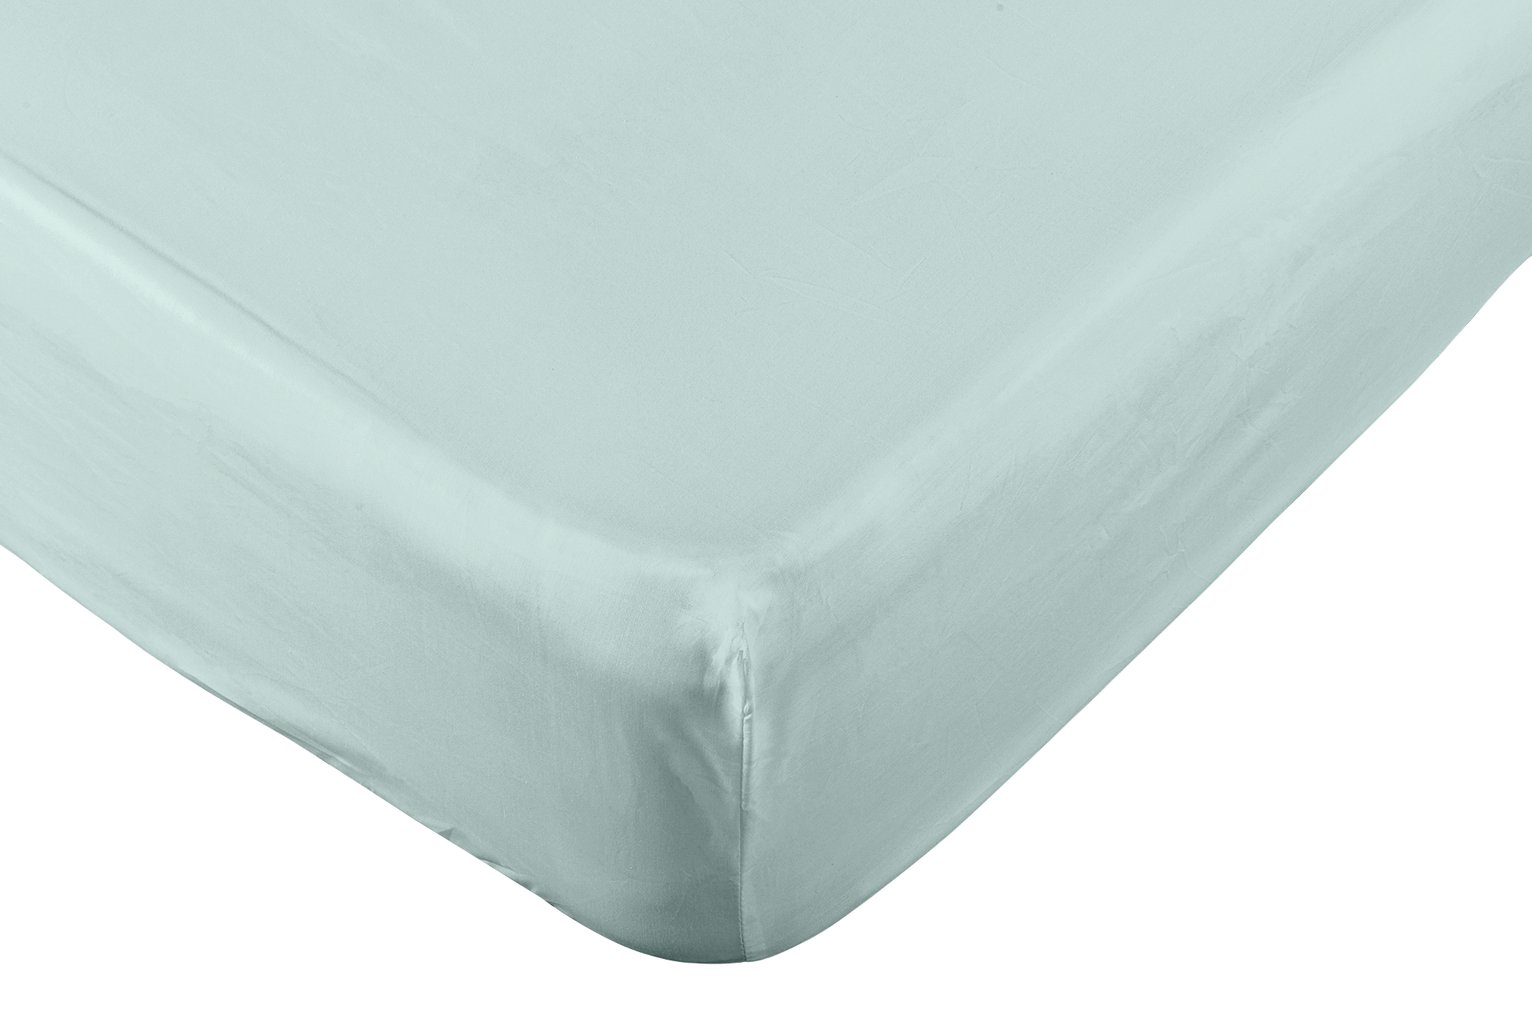 Argos Home Easycare 100% Cotton 28cm Fitted Sheet - Single